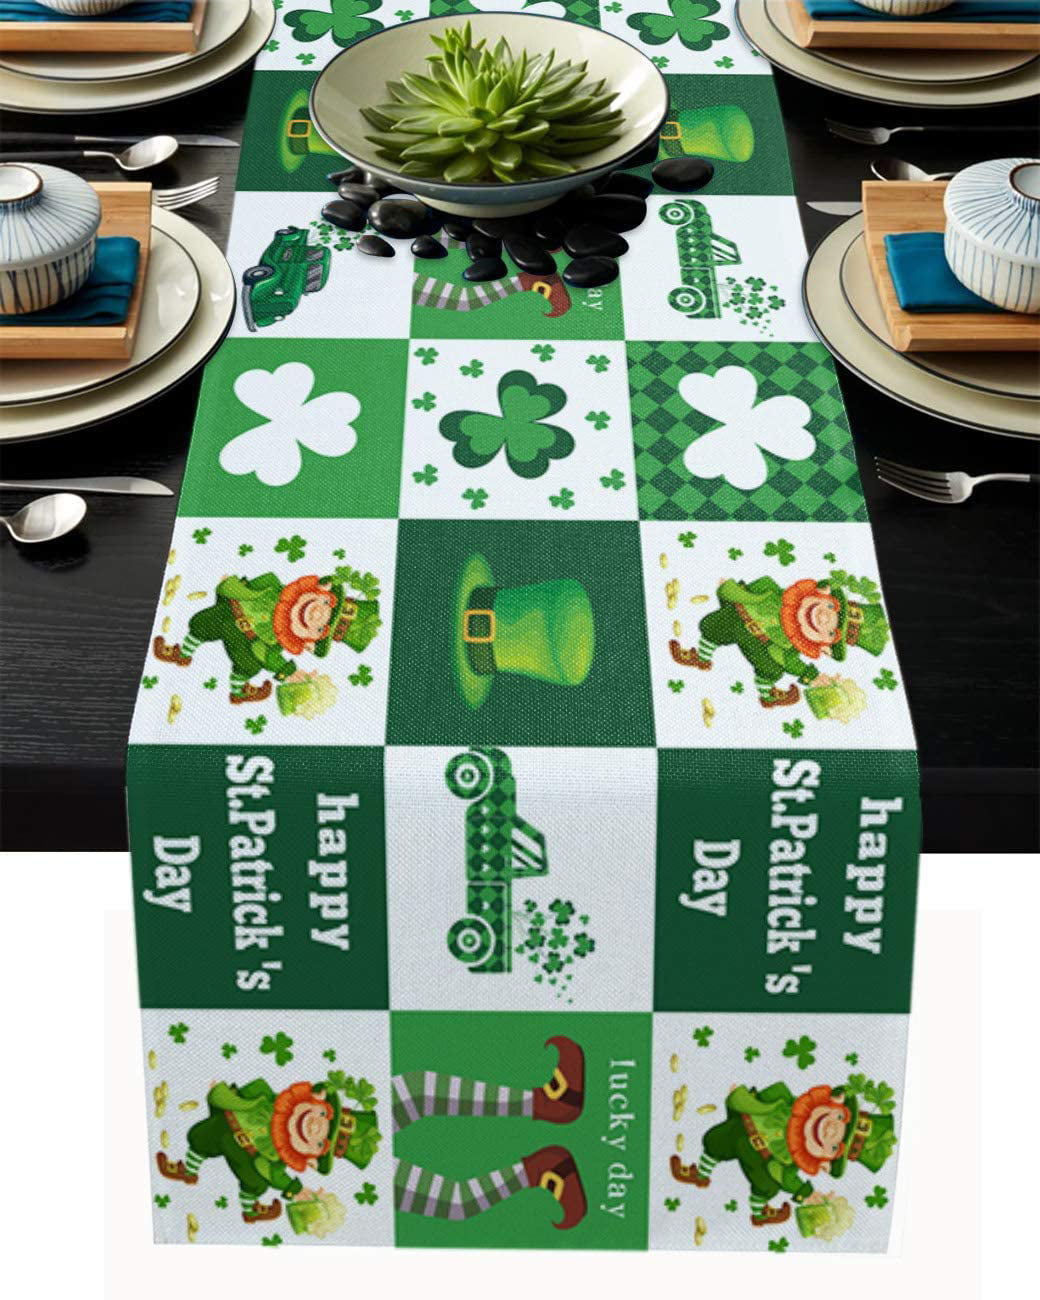 Happy St Patricks Day Gnomes Shamrock Lucky Placemats Set of 4 Cotton Line Fabric Heat Resistant Table Mats Non-Slip Washable Decoration for Home Kitchen Dining Wedding Holiday Party,Green White